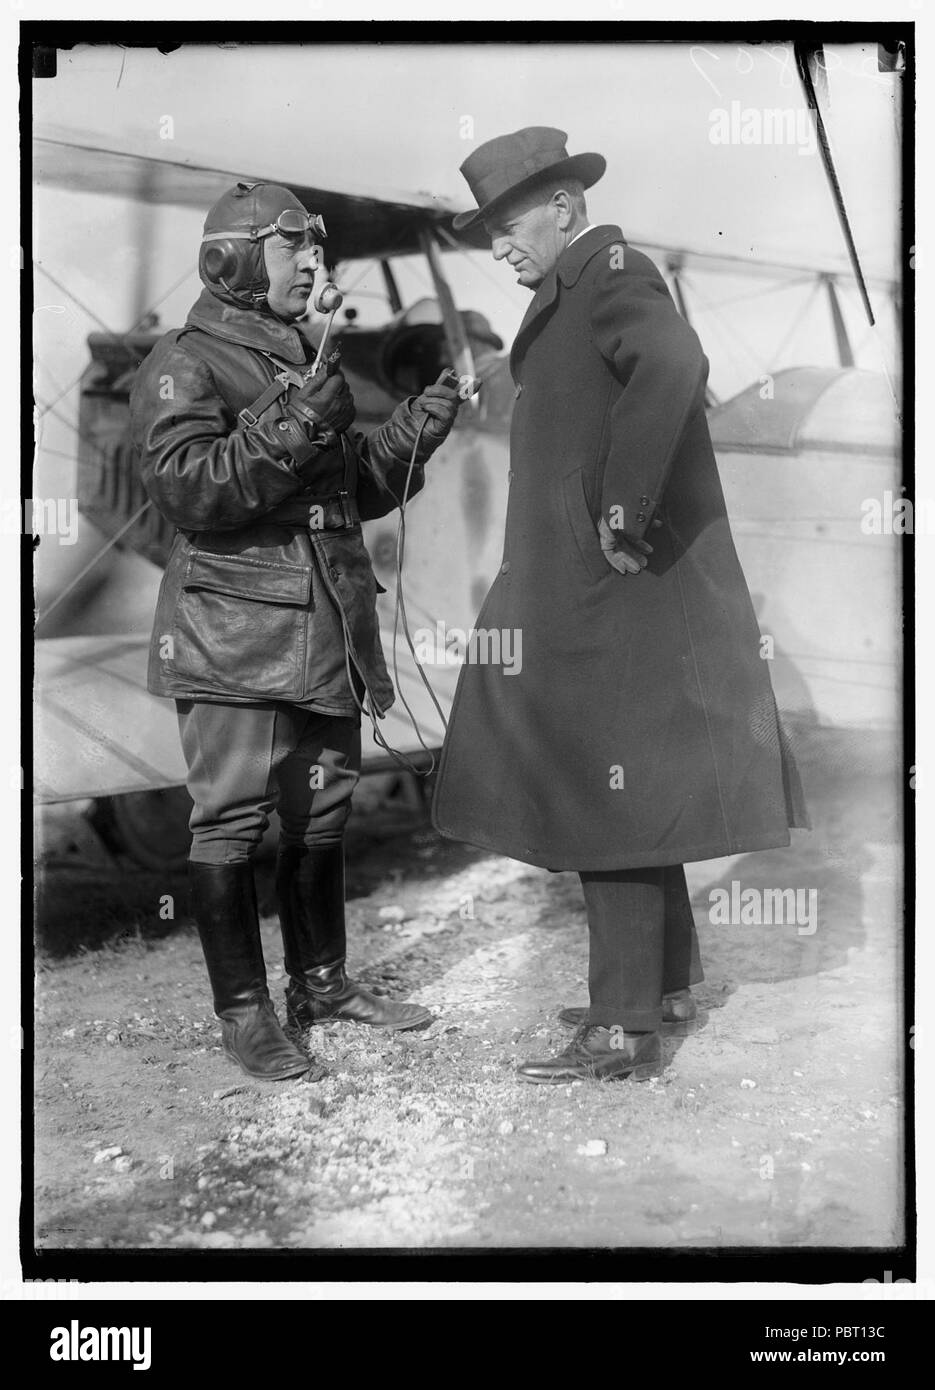 ADAMS, A.K. COMDR. U.S.N.- CHIEF DIV. OF AERNAUTICS, BUR. OF STEAM ENG. NAVY DEPT. R. WITH COL. C.C. CULVER, U.S.A. IN CHARGE OF AIRPLANE RADIO DEV. Stock Photo